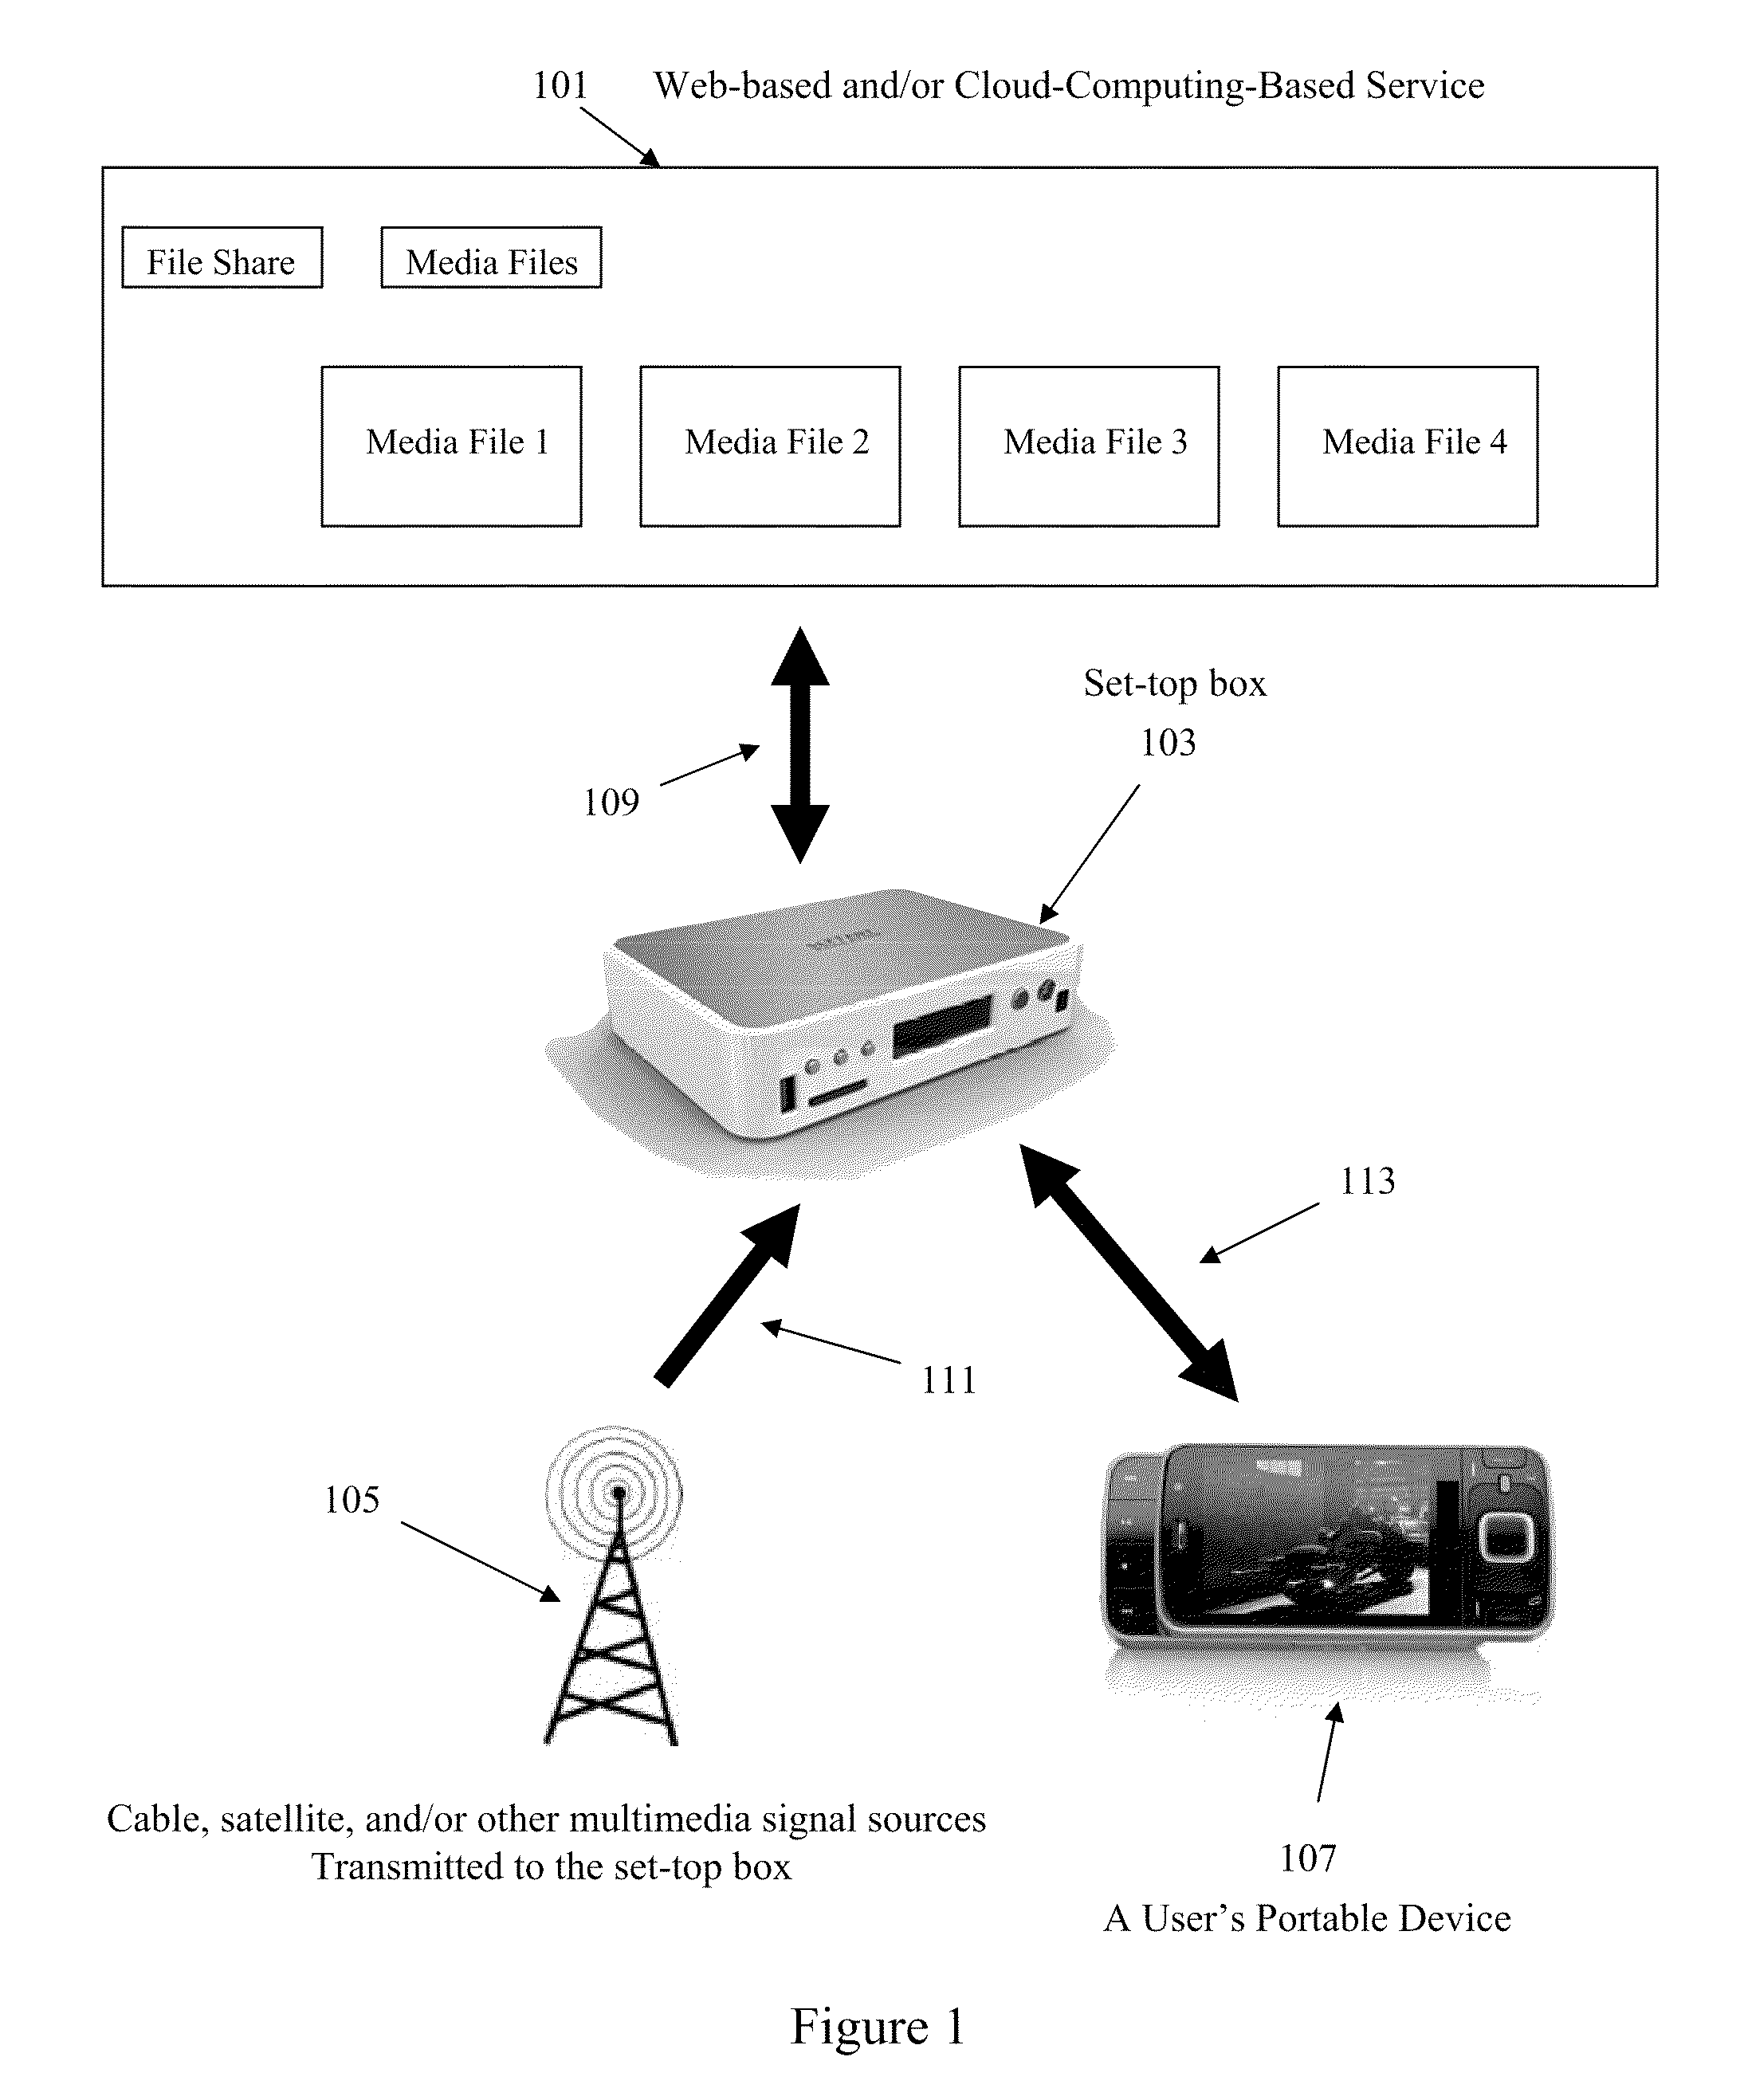 Apparatus and Method for Multimedia Data Reception, Processing, Routing, Storage, and Access Using a Web / Cloud-Computing Synchronization of Personal Multimedia Data